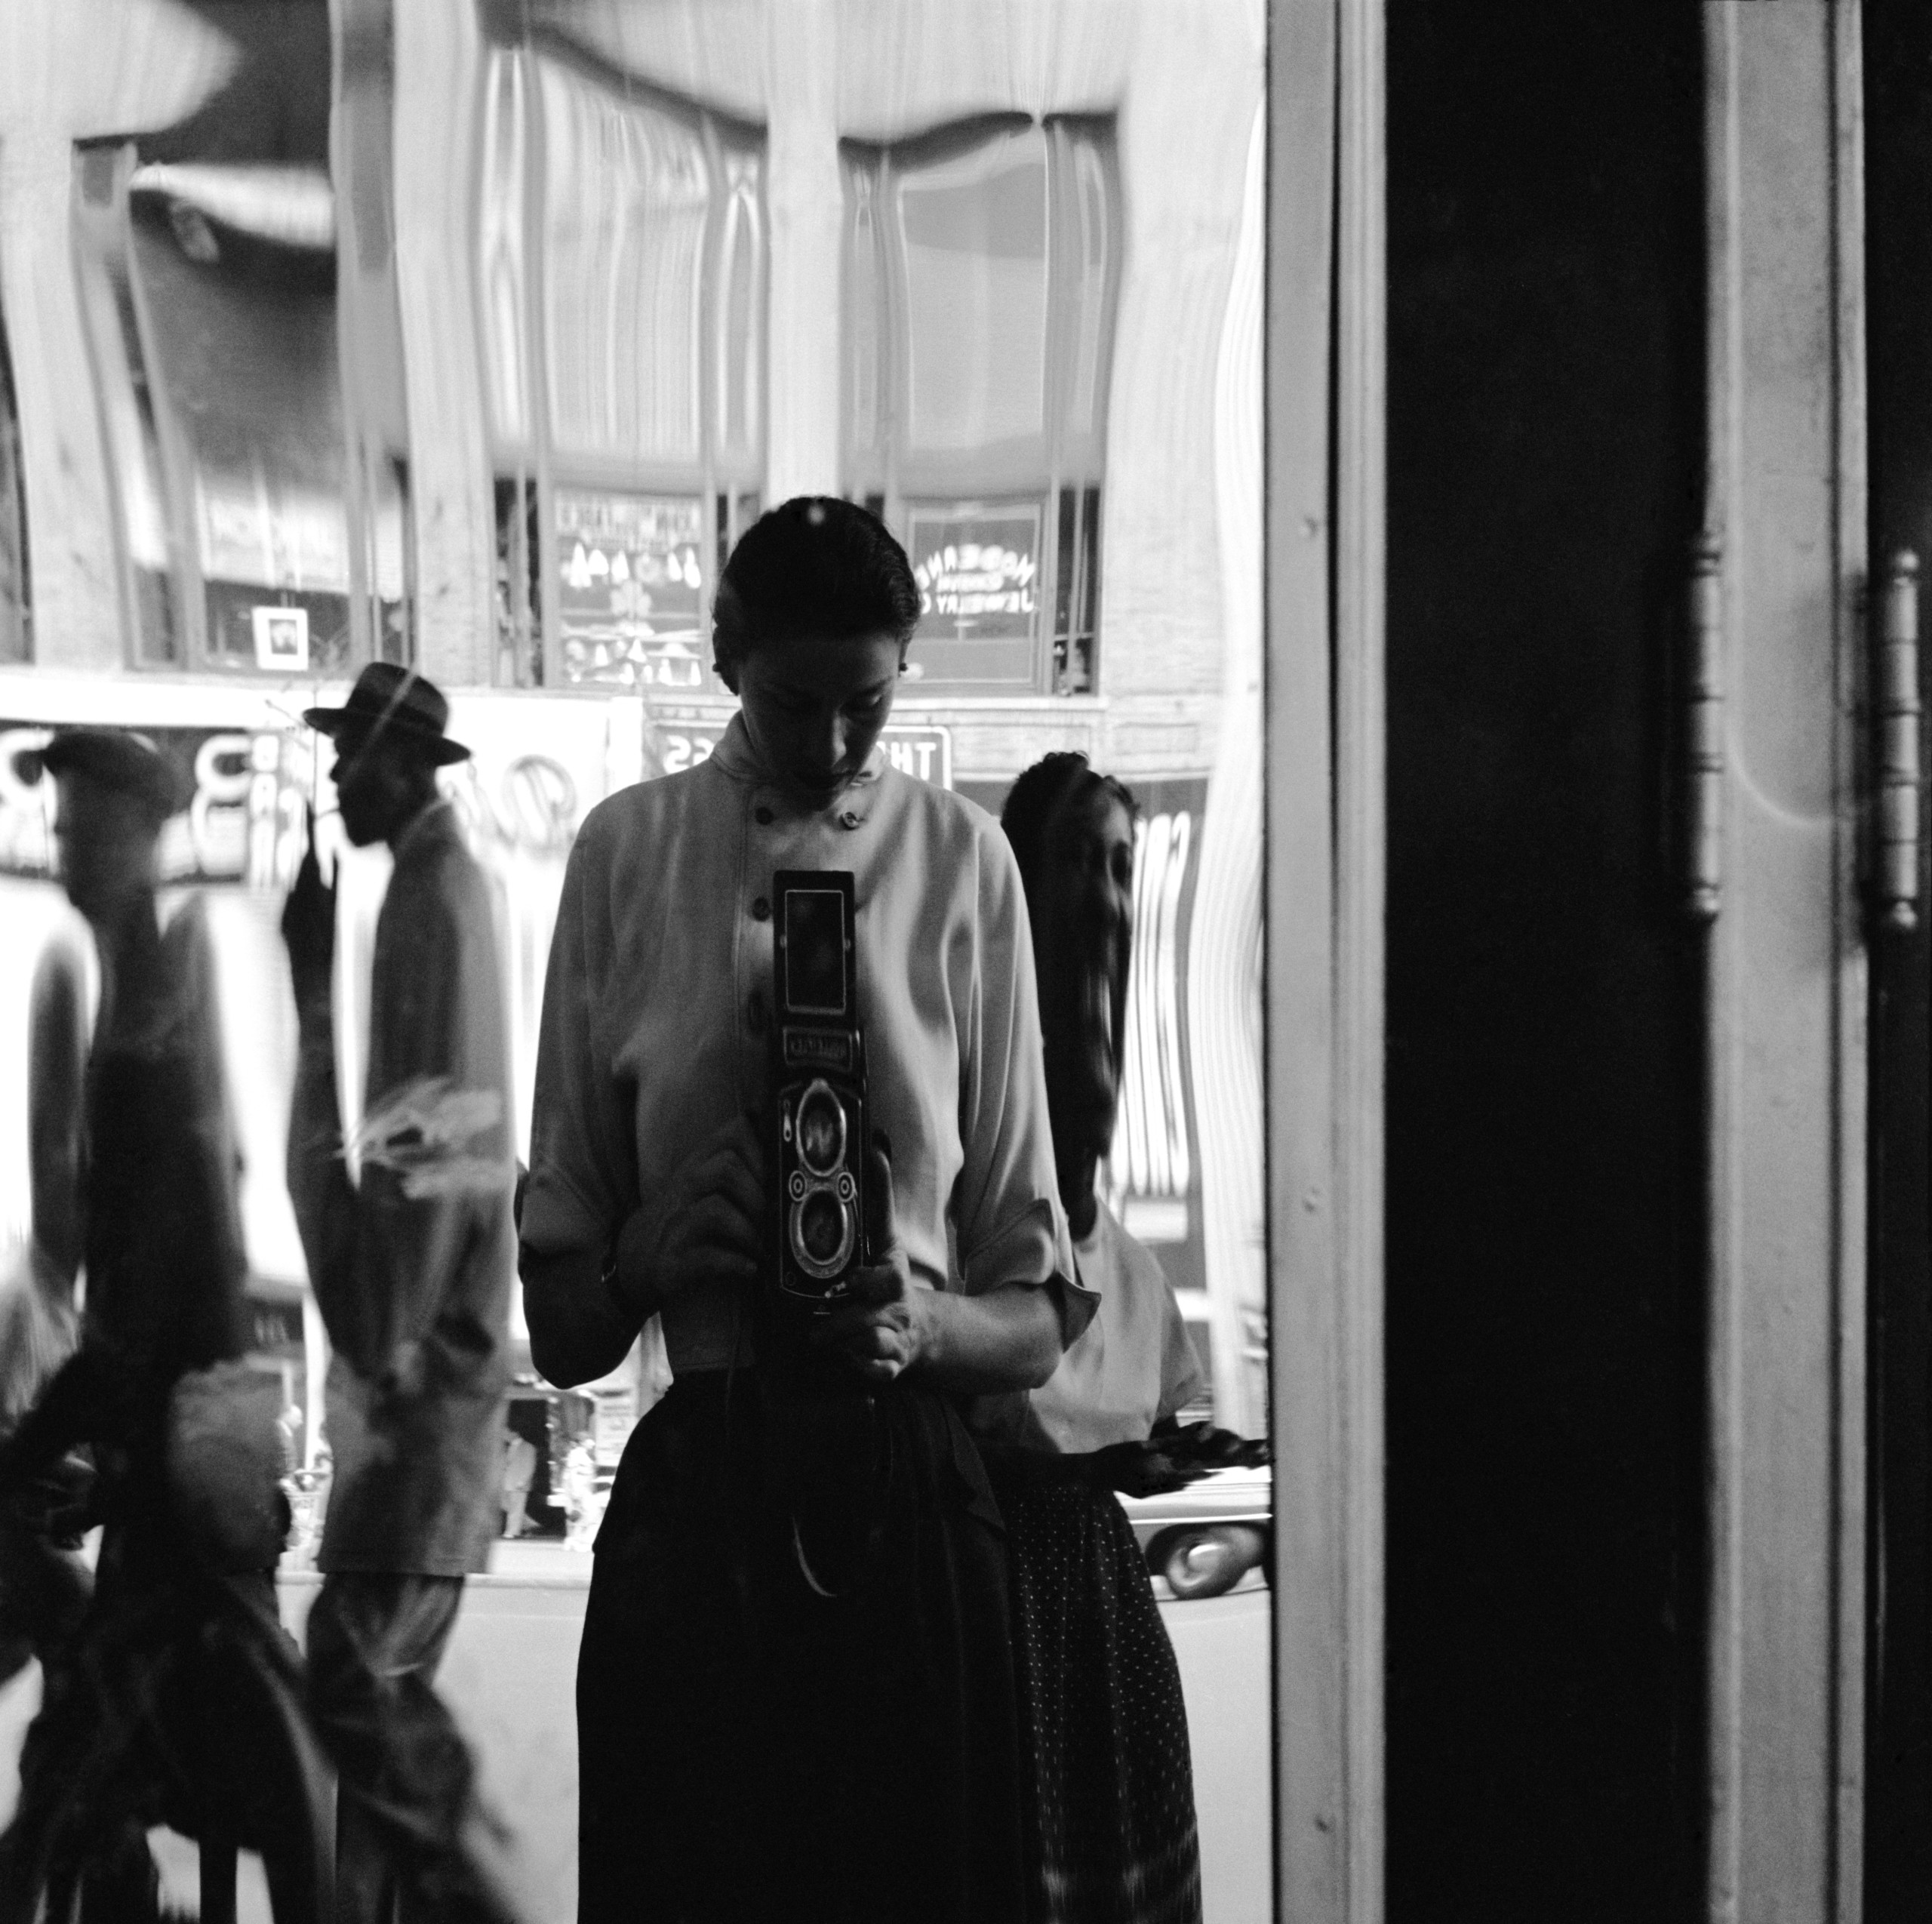 Eve Arnold: The Unretouched Woman • Magnum Photos